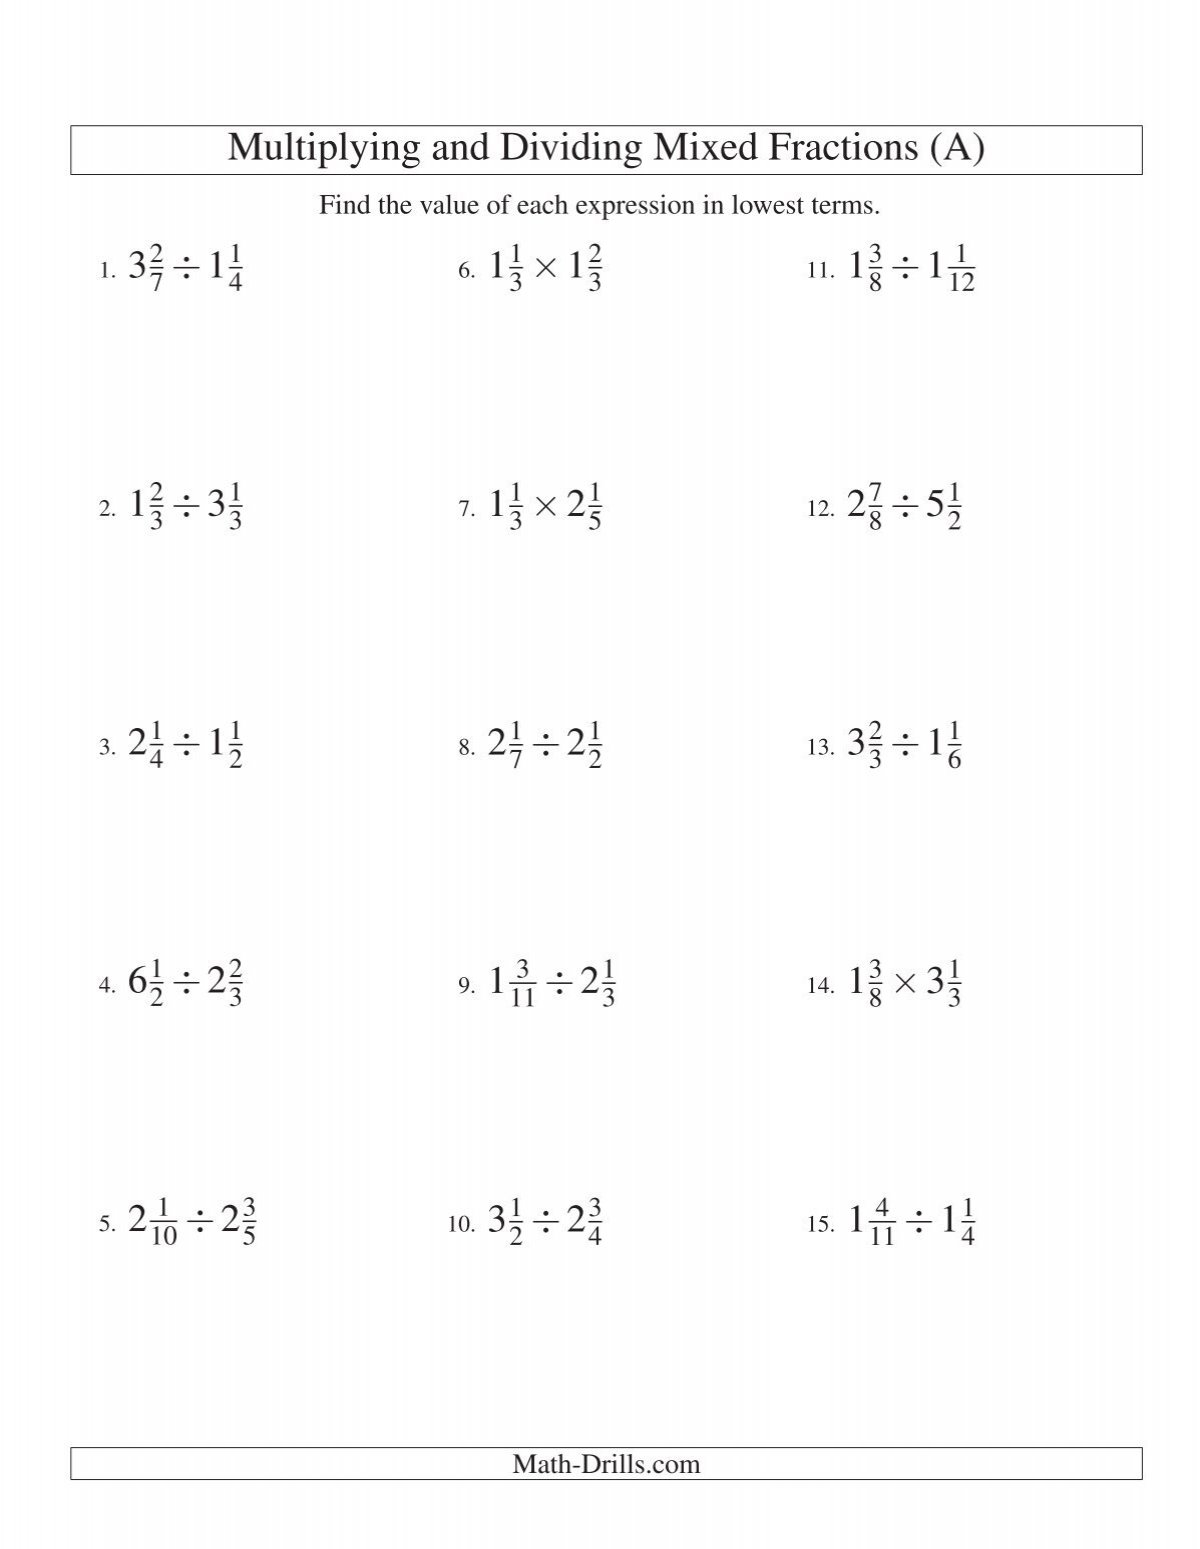 Multiplying And Dividing Mixed Fractions Word Problems Worksheet With Answers Pdf